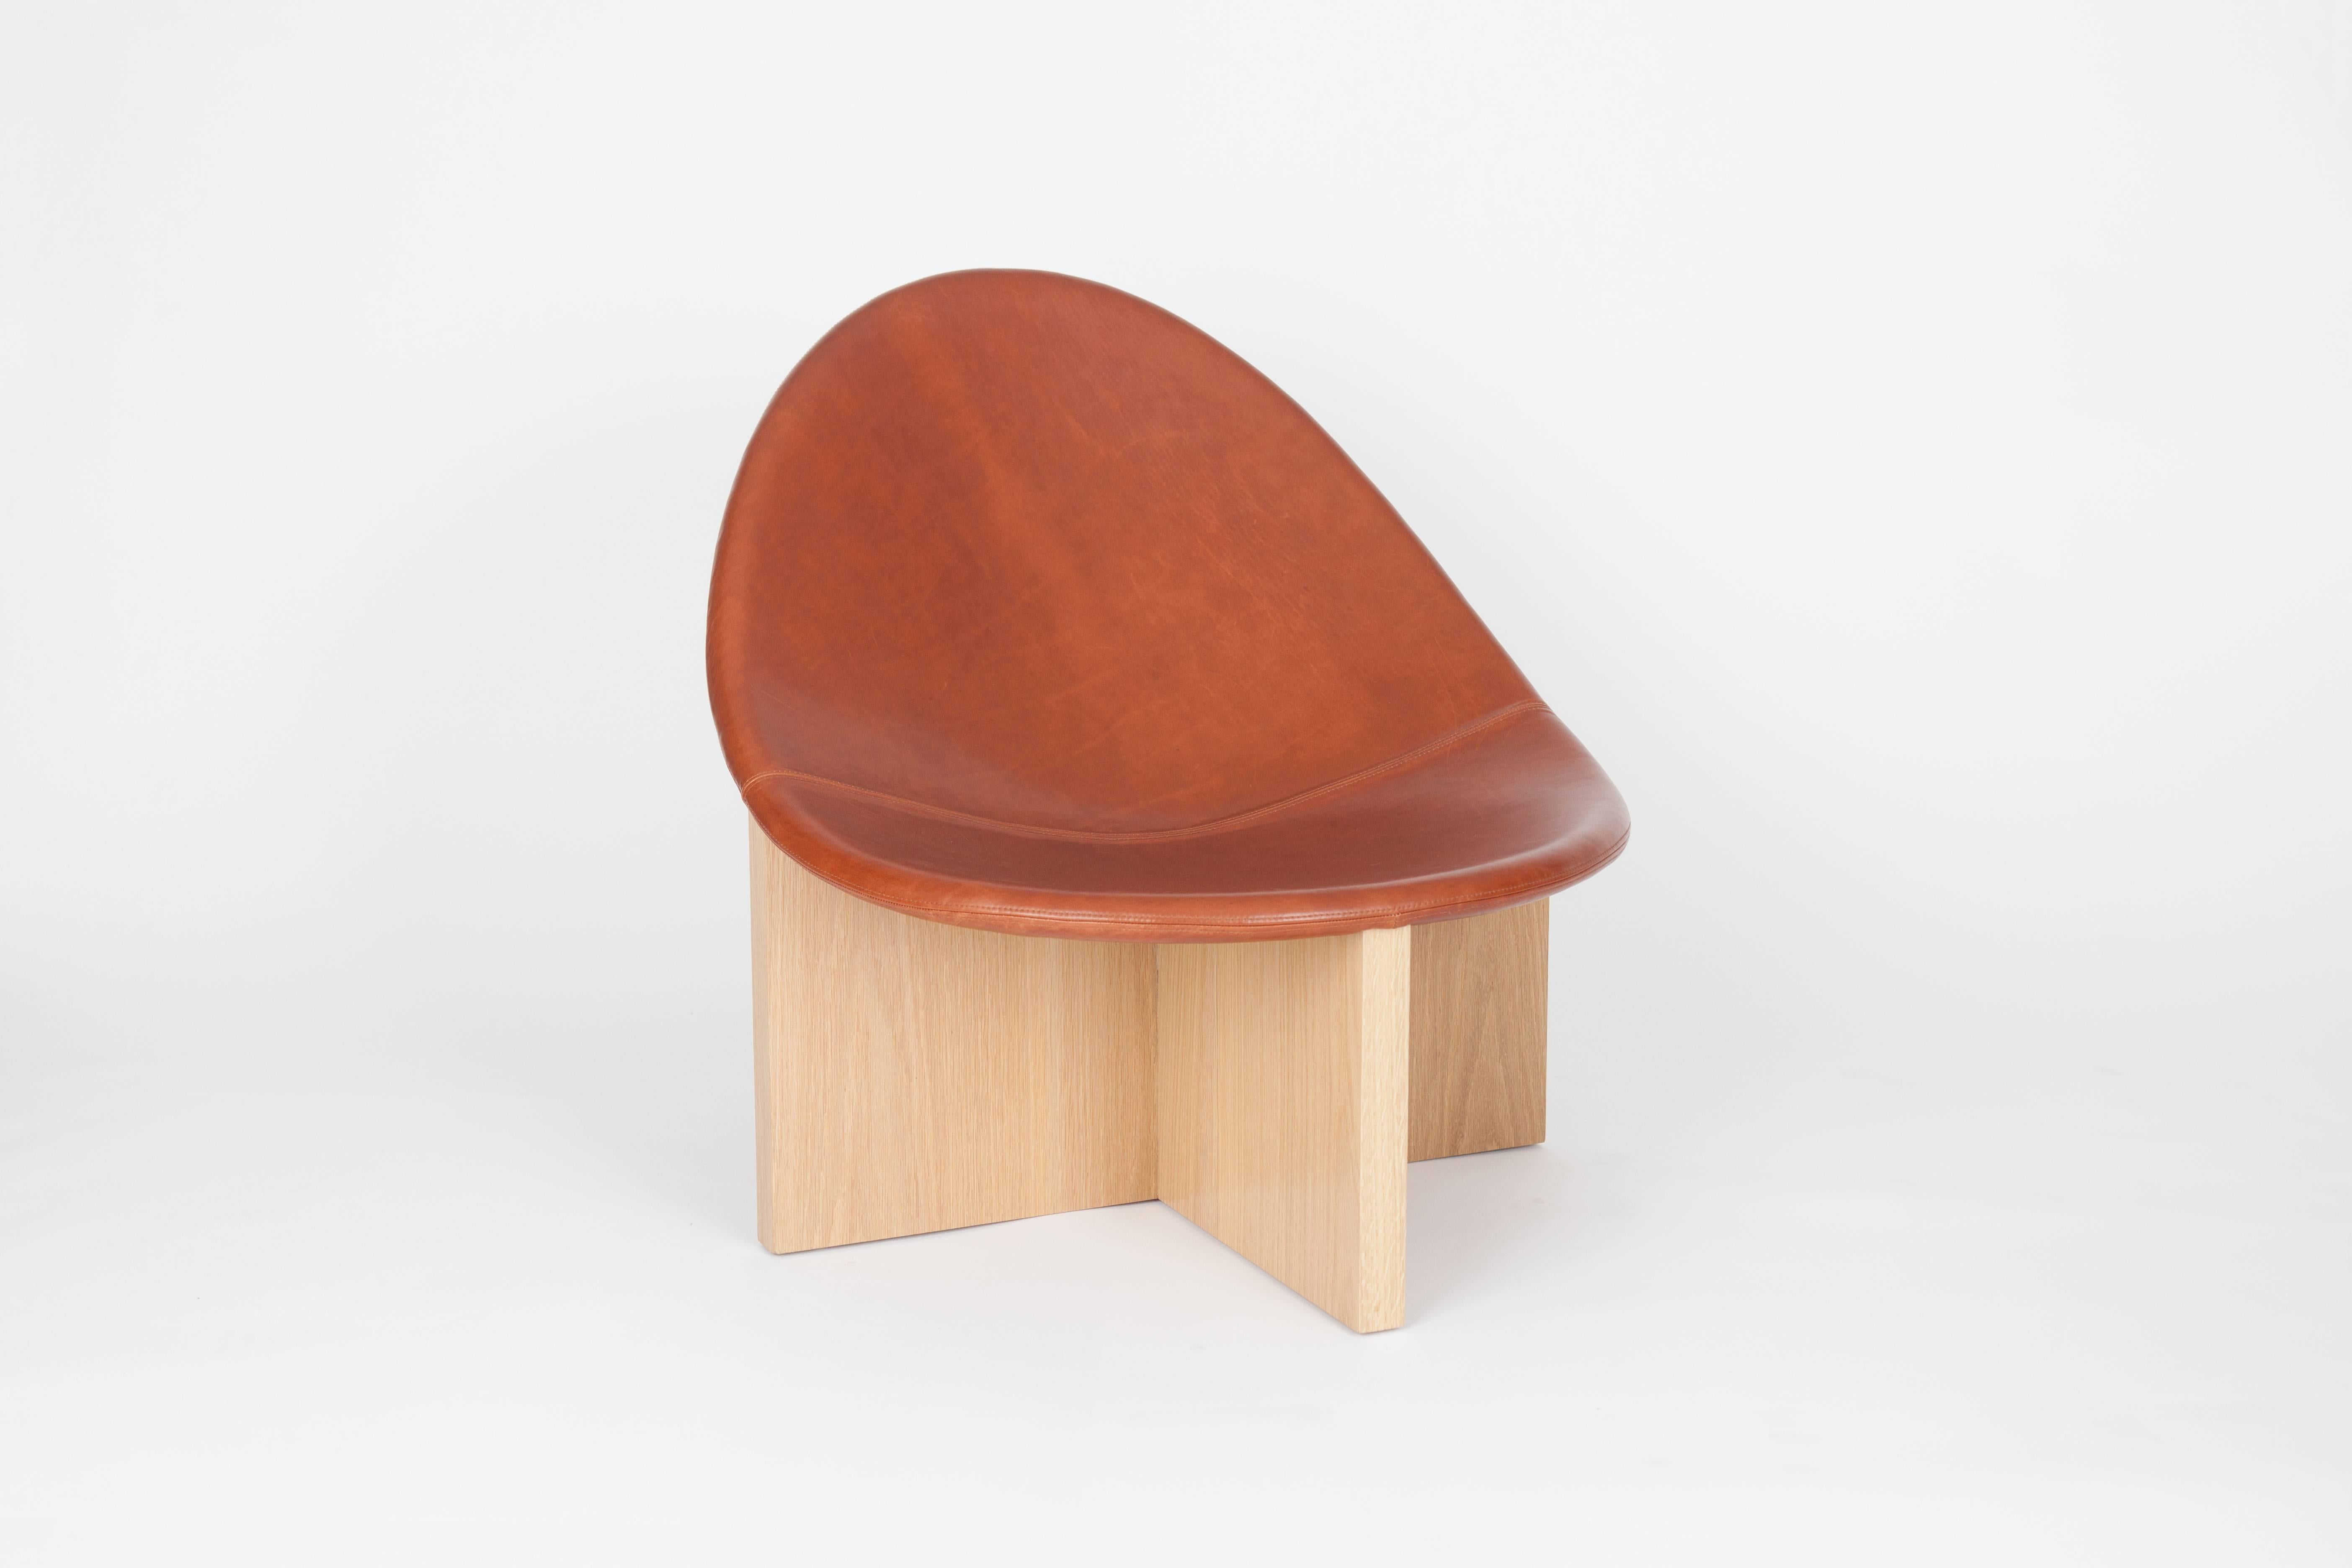 The NIDO Chair was the result of playing with the juxtaposition of shapes. The egg-like shape of the leather upholstered wood seat nesting in the cross shaped solid wood frame gives it the name NIDO, meaning nest in Spanish. The strong lines of the